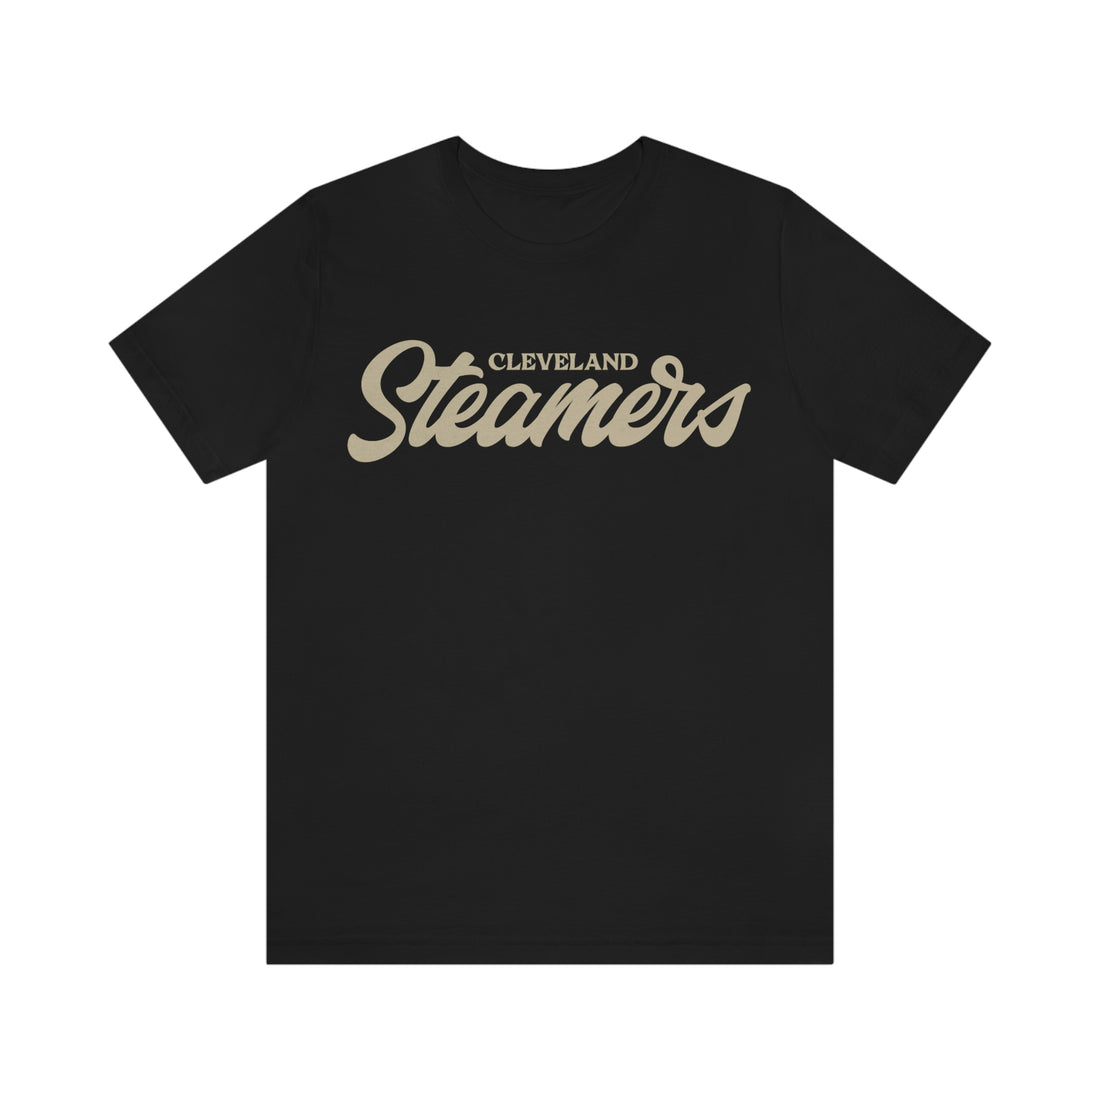 Cleveland Steamers Tee